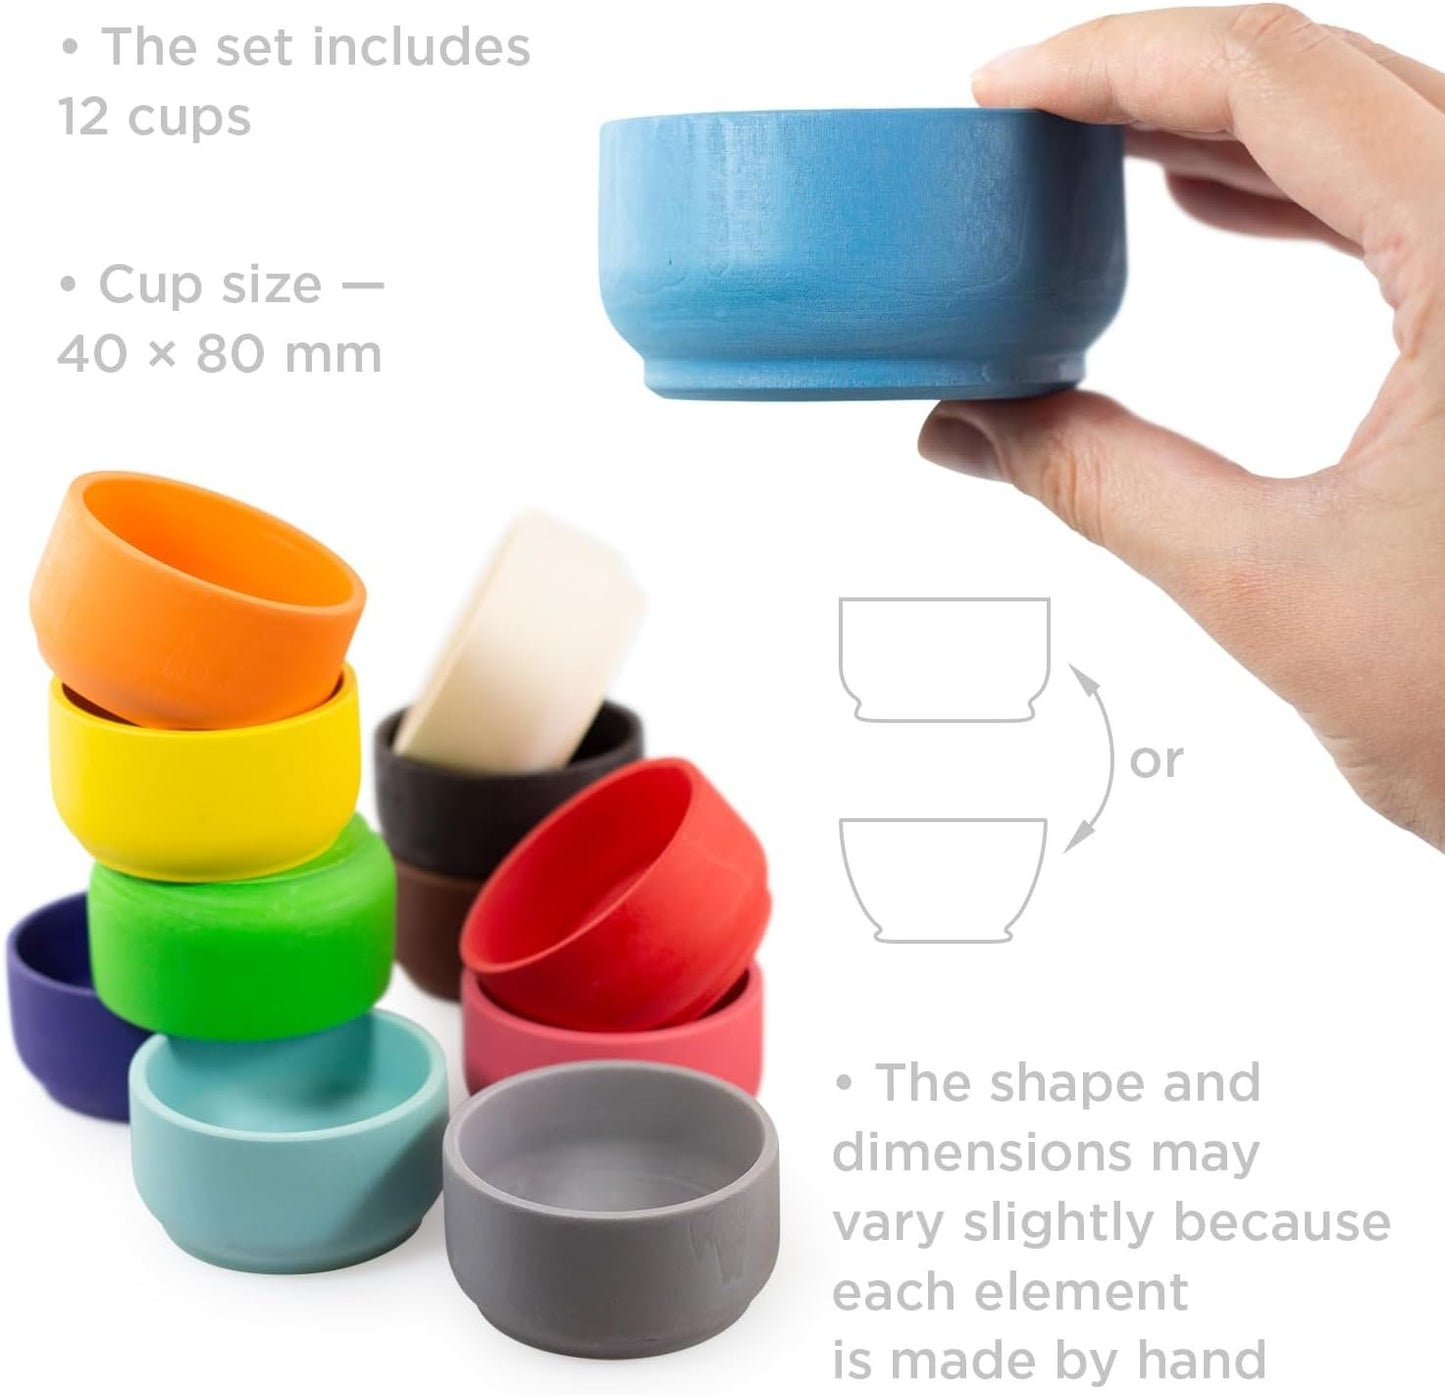 Ulanik Sorting Cups Toddler Montessori Toys for 3+ Year Old Wooden Stacking Game for Learning Color & Counting